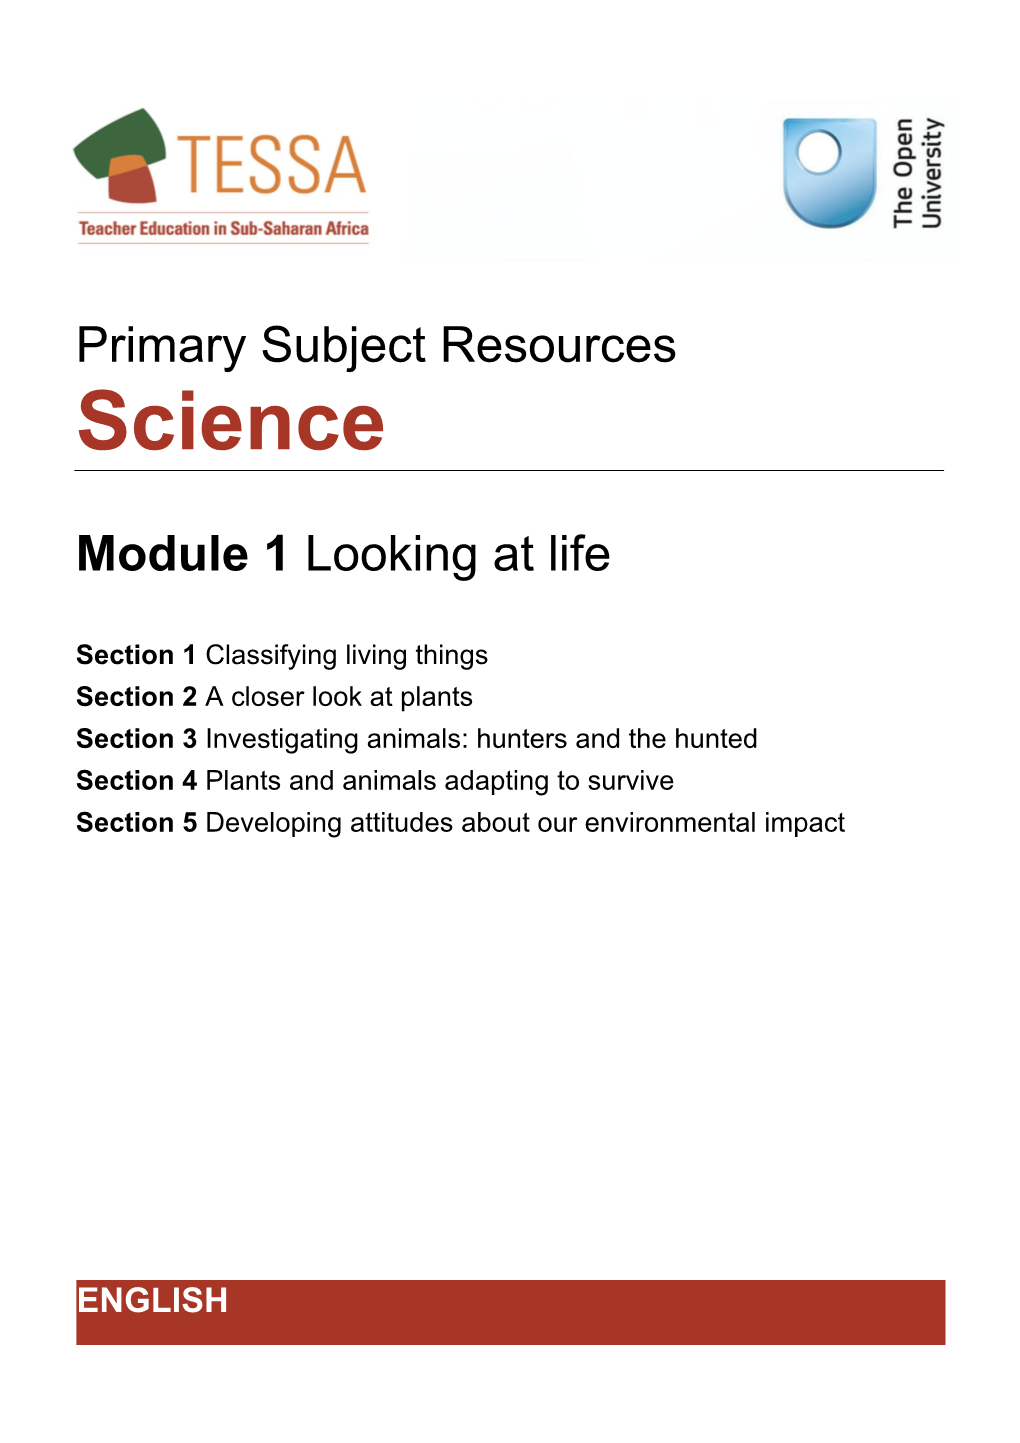 Module 1: Science - Looking at Life s1